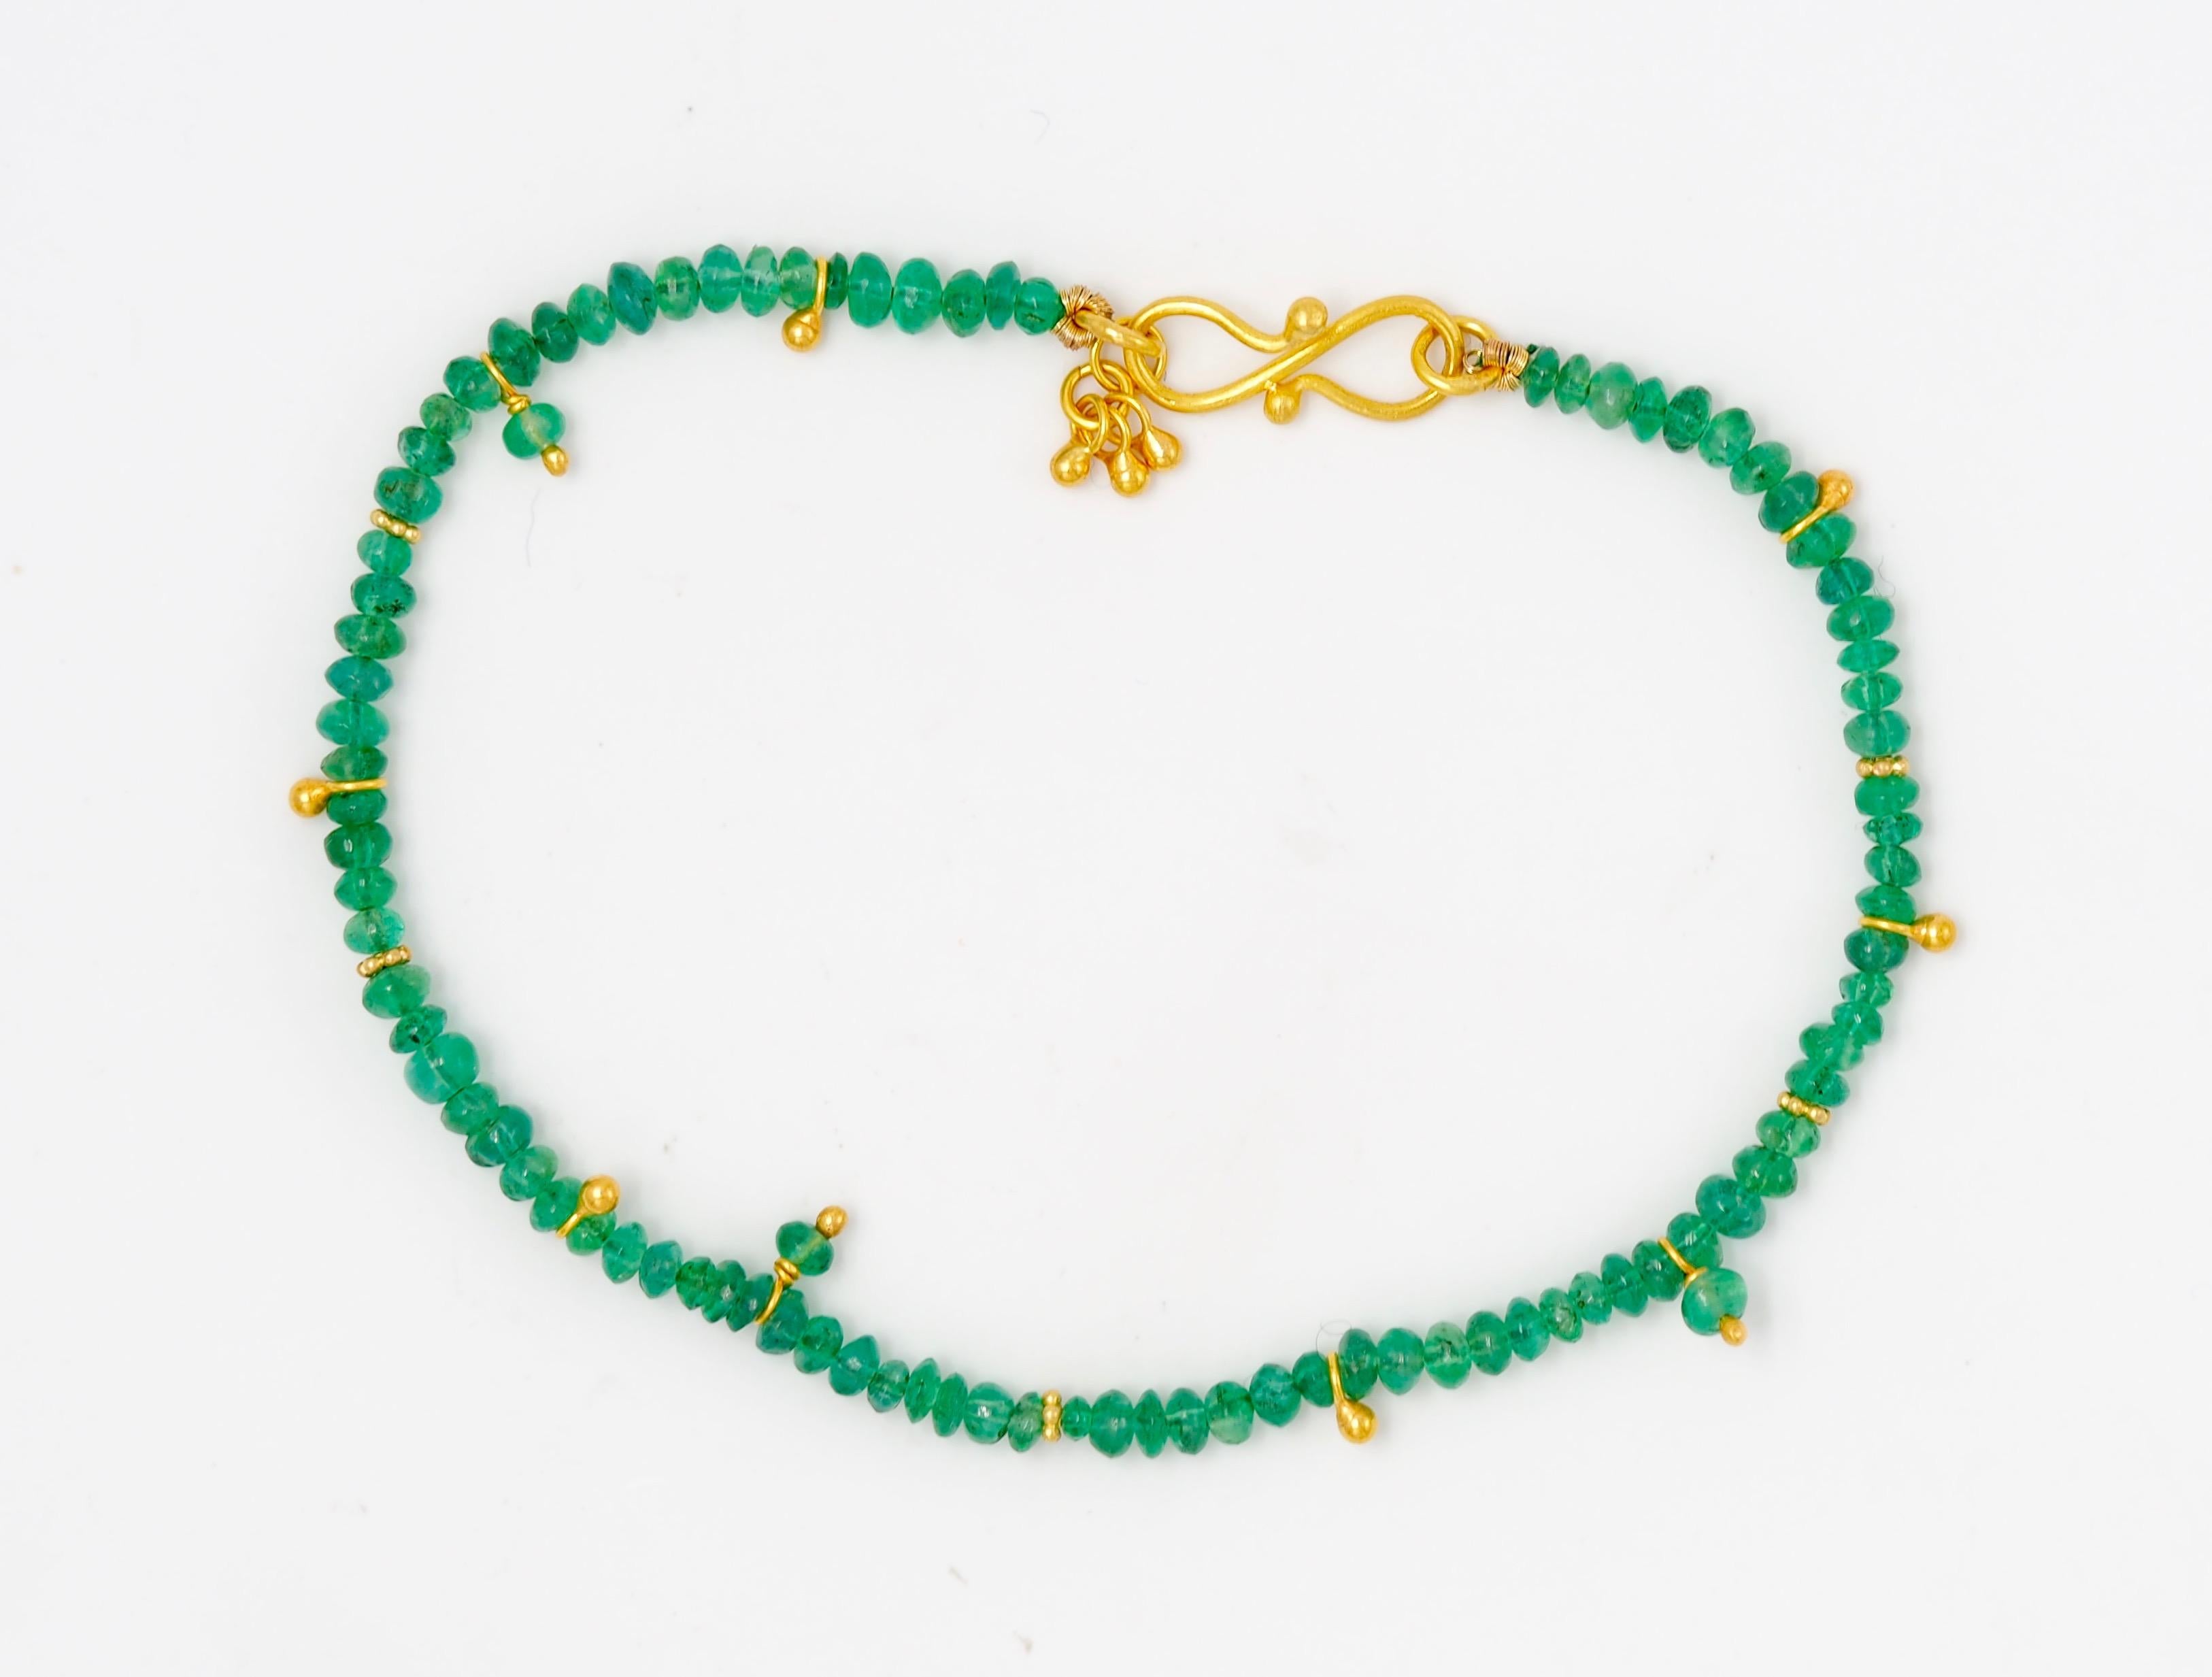 The beads of this bracelet by Scrives are made from natural emeralds of pure emerald green colour (approx emerald weight: 9 carats). The beads have all been hand-cut so they all have different shapes.
Few elements have been placed randomly (gold